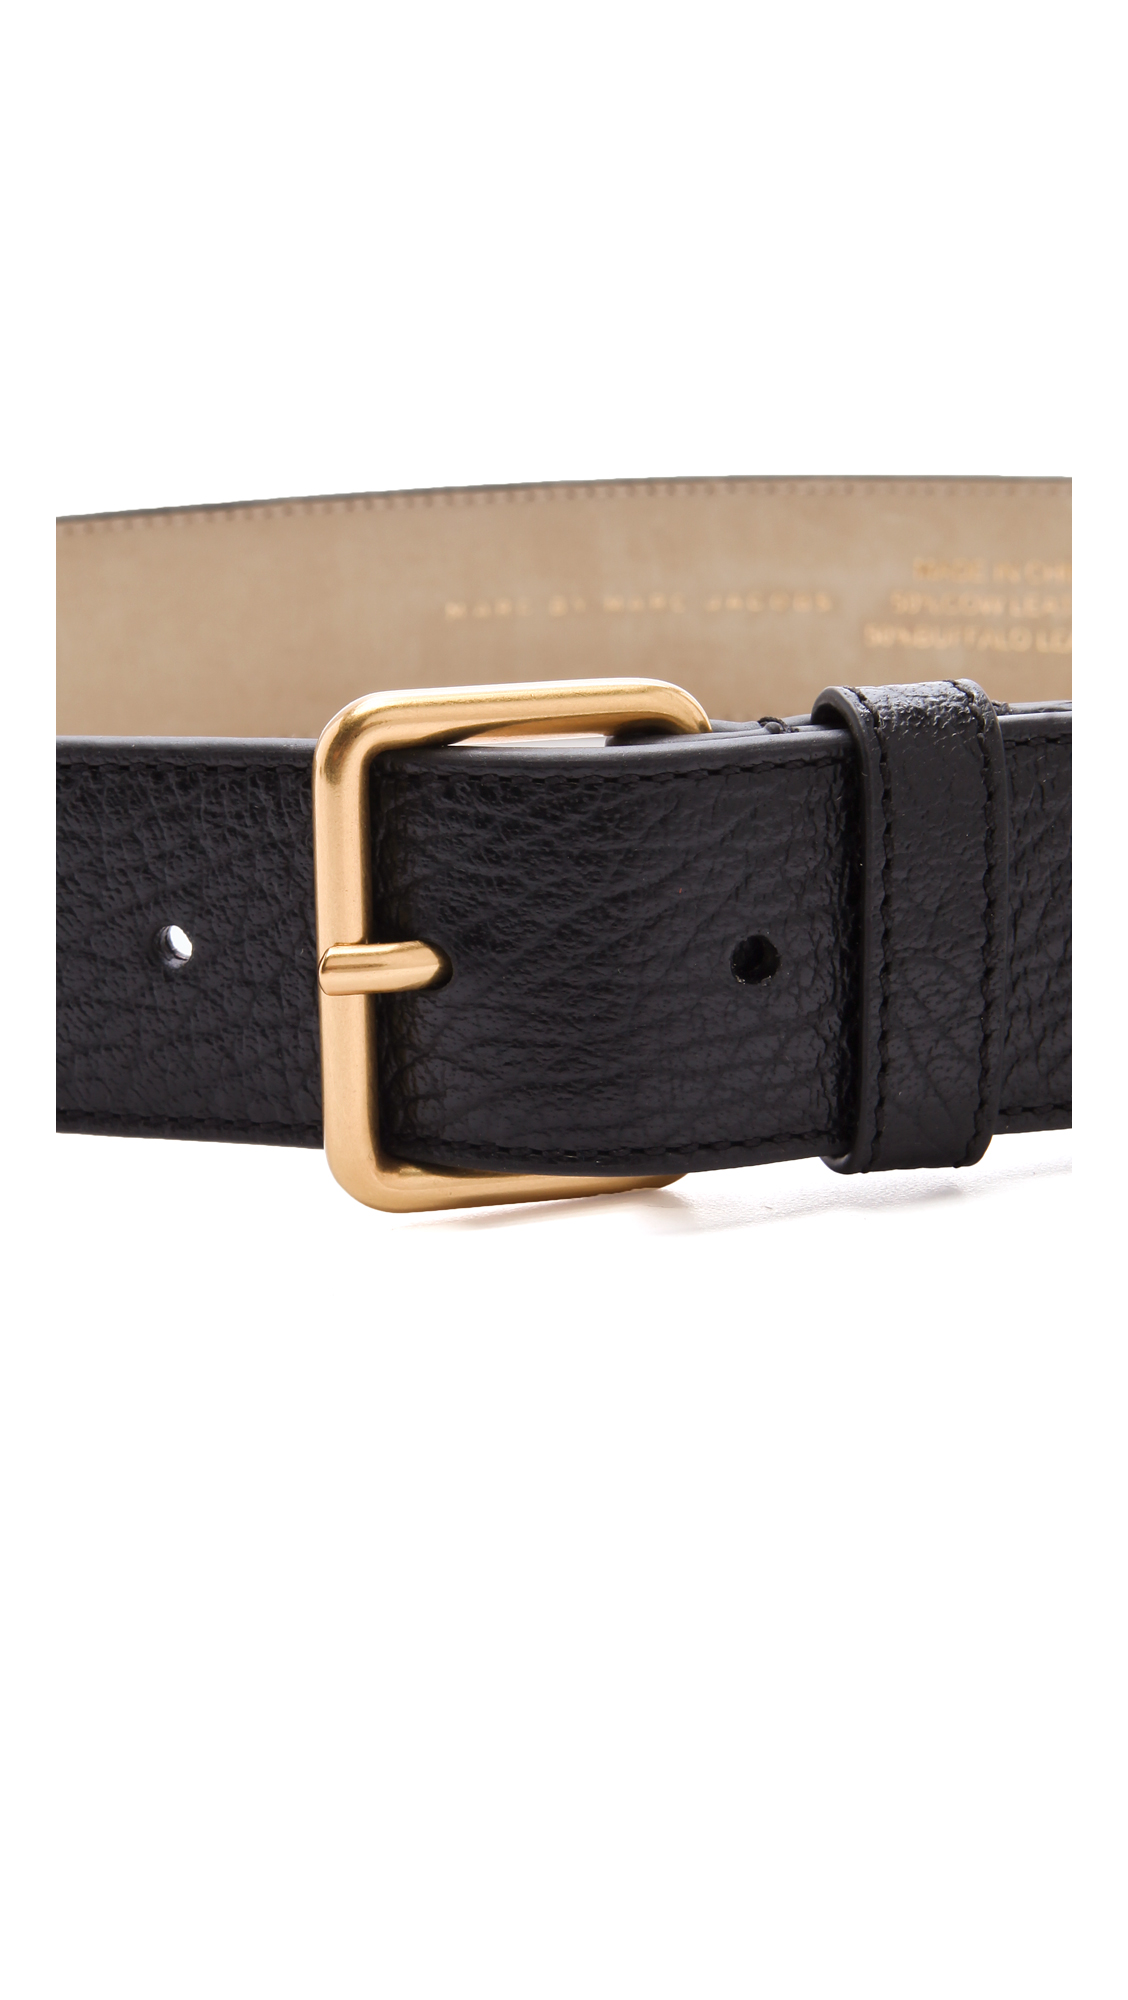 Marc by marc jacobs Classic 4cm Belt in Black | Lyst